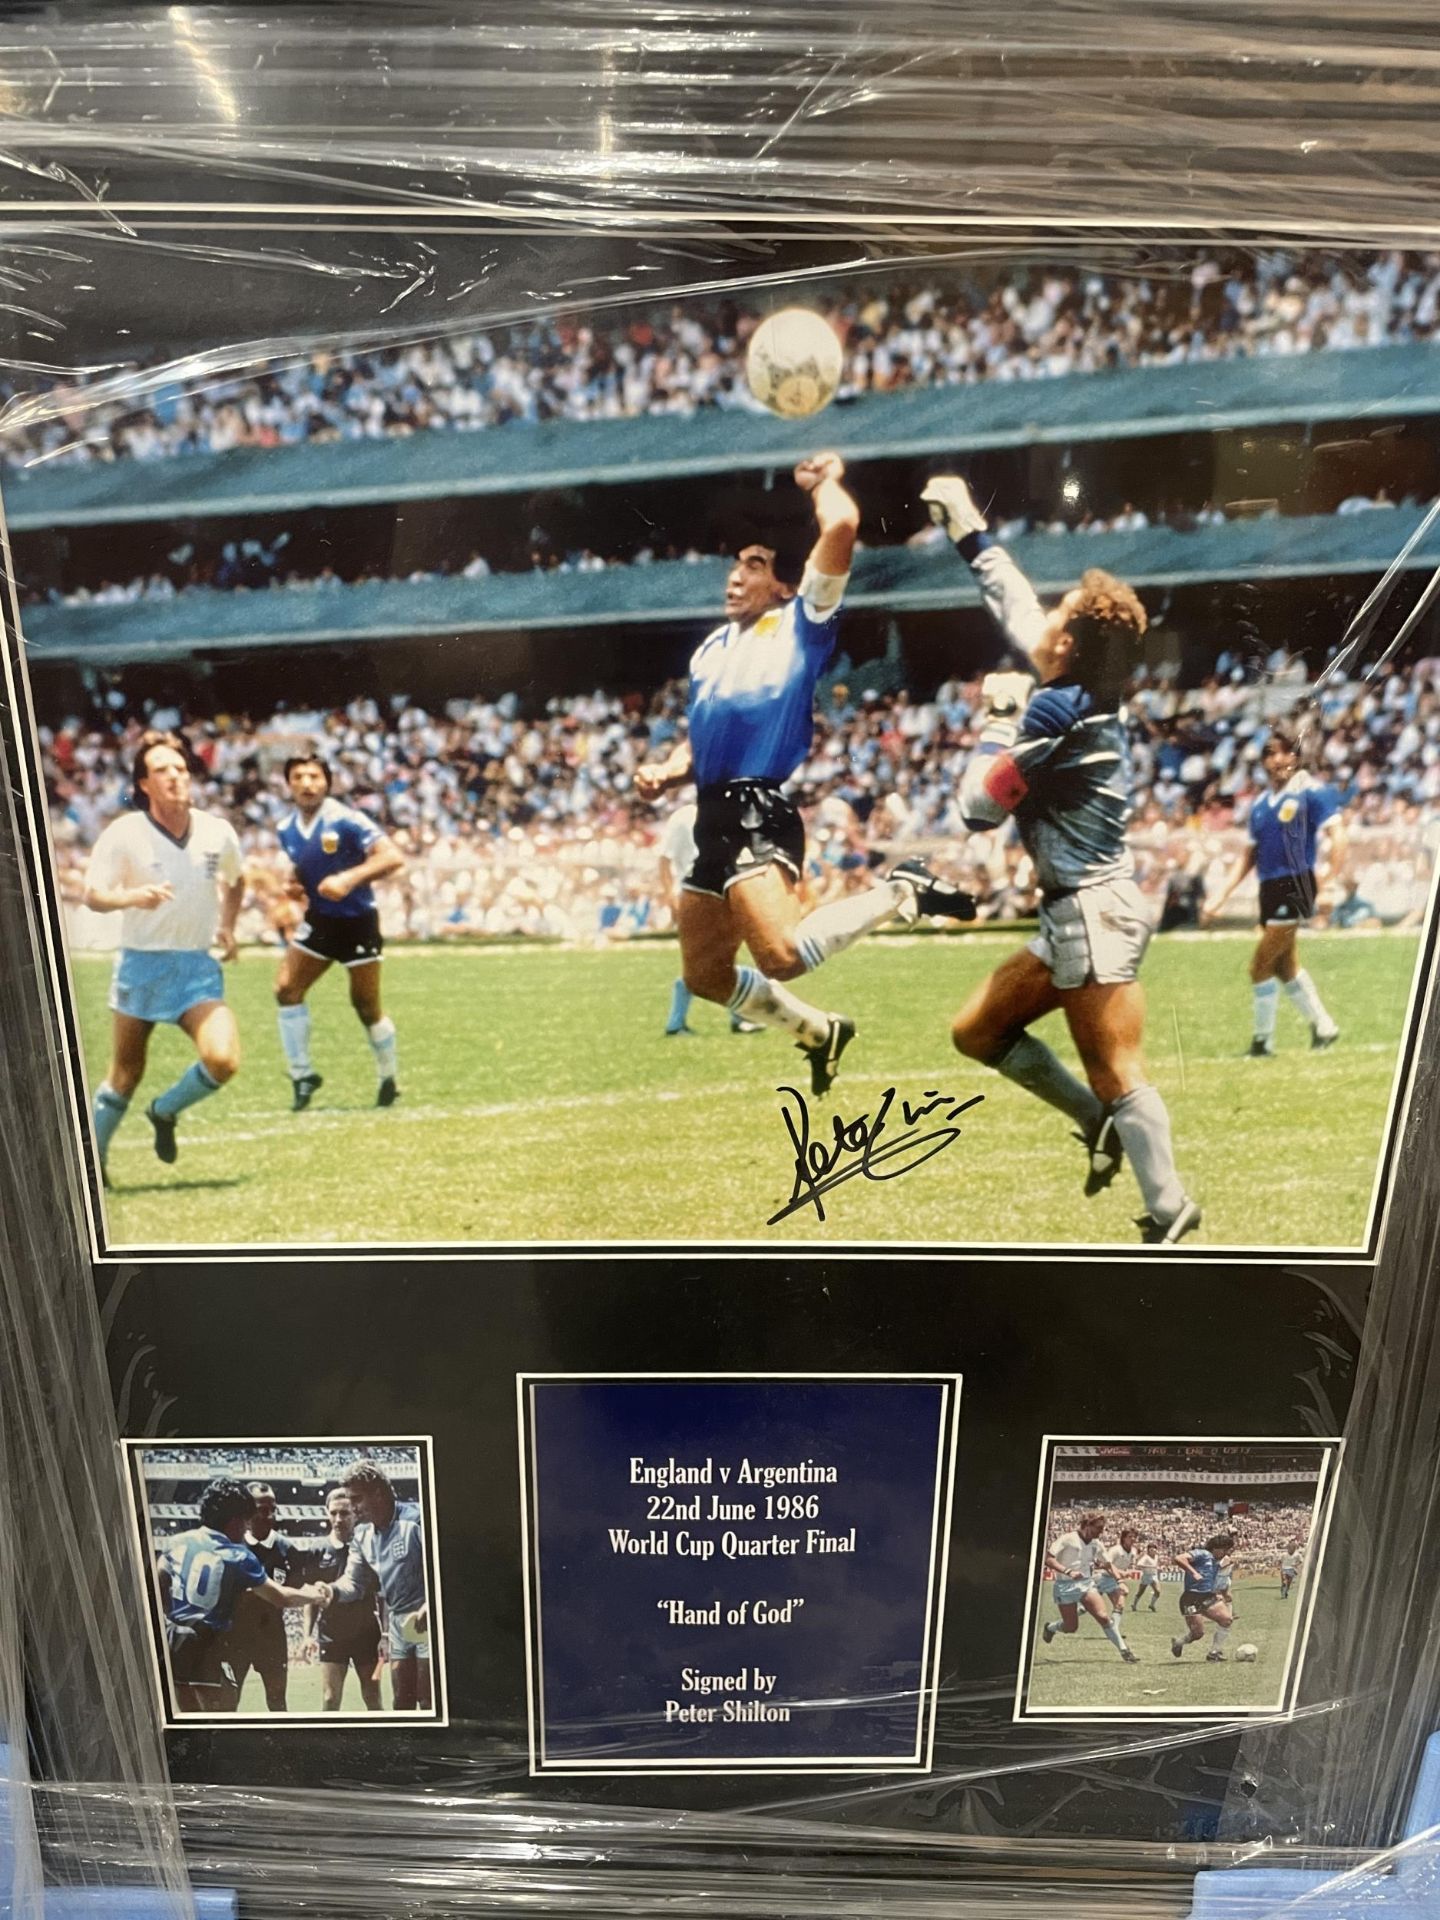 A FRAMED 1986 WORLD CUP 'HAND OF GOD' PHOTO SIGNED BY PETER SHILTON, WITH ALL STAR SIGNINGS - Bild 2 aus 5